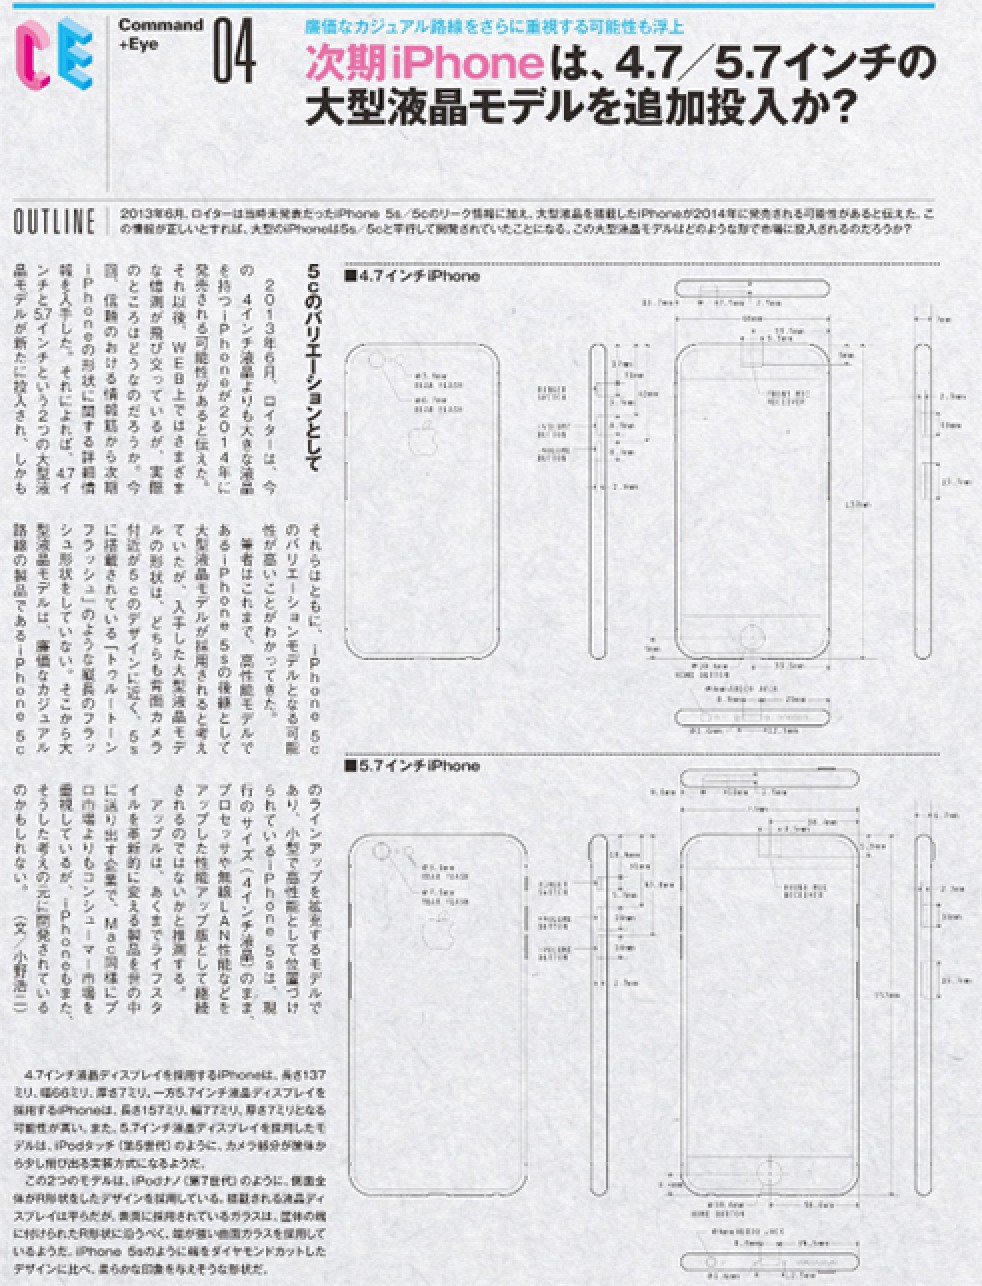 Drawings of Alleged 4.7-Inch and 5.7-Inch iPhone 6c Models Surface